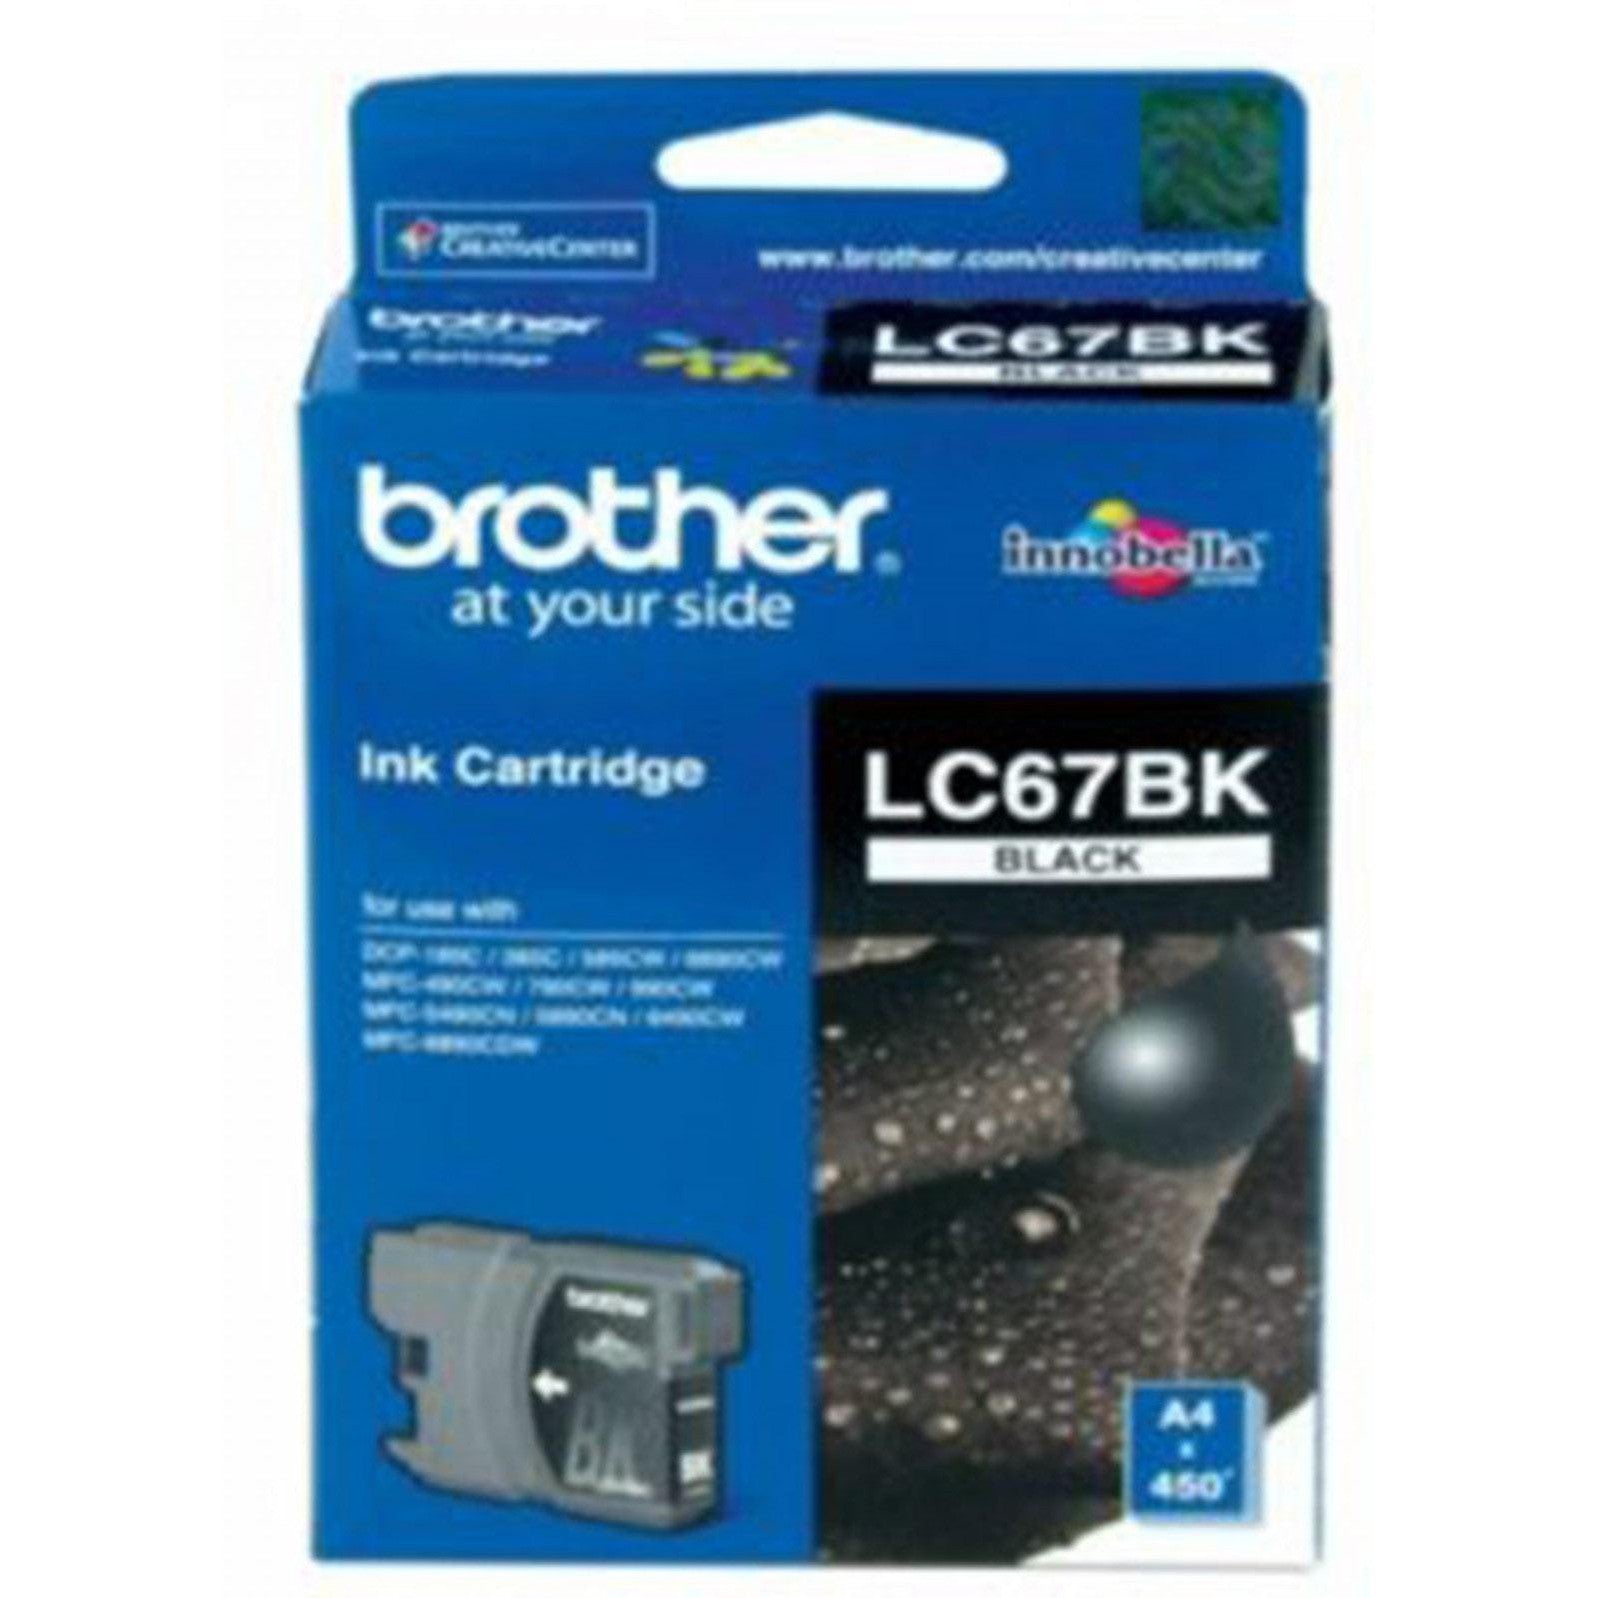 Brother Lc 67 Black Ink Cartridge-Inks And Toners-Brother-Star Light Kuwait